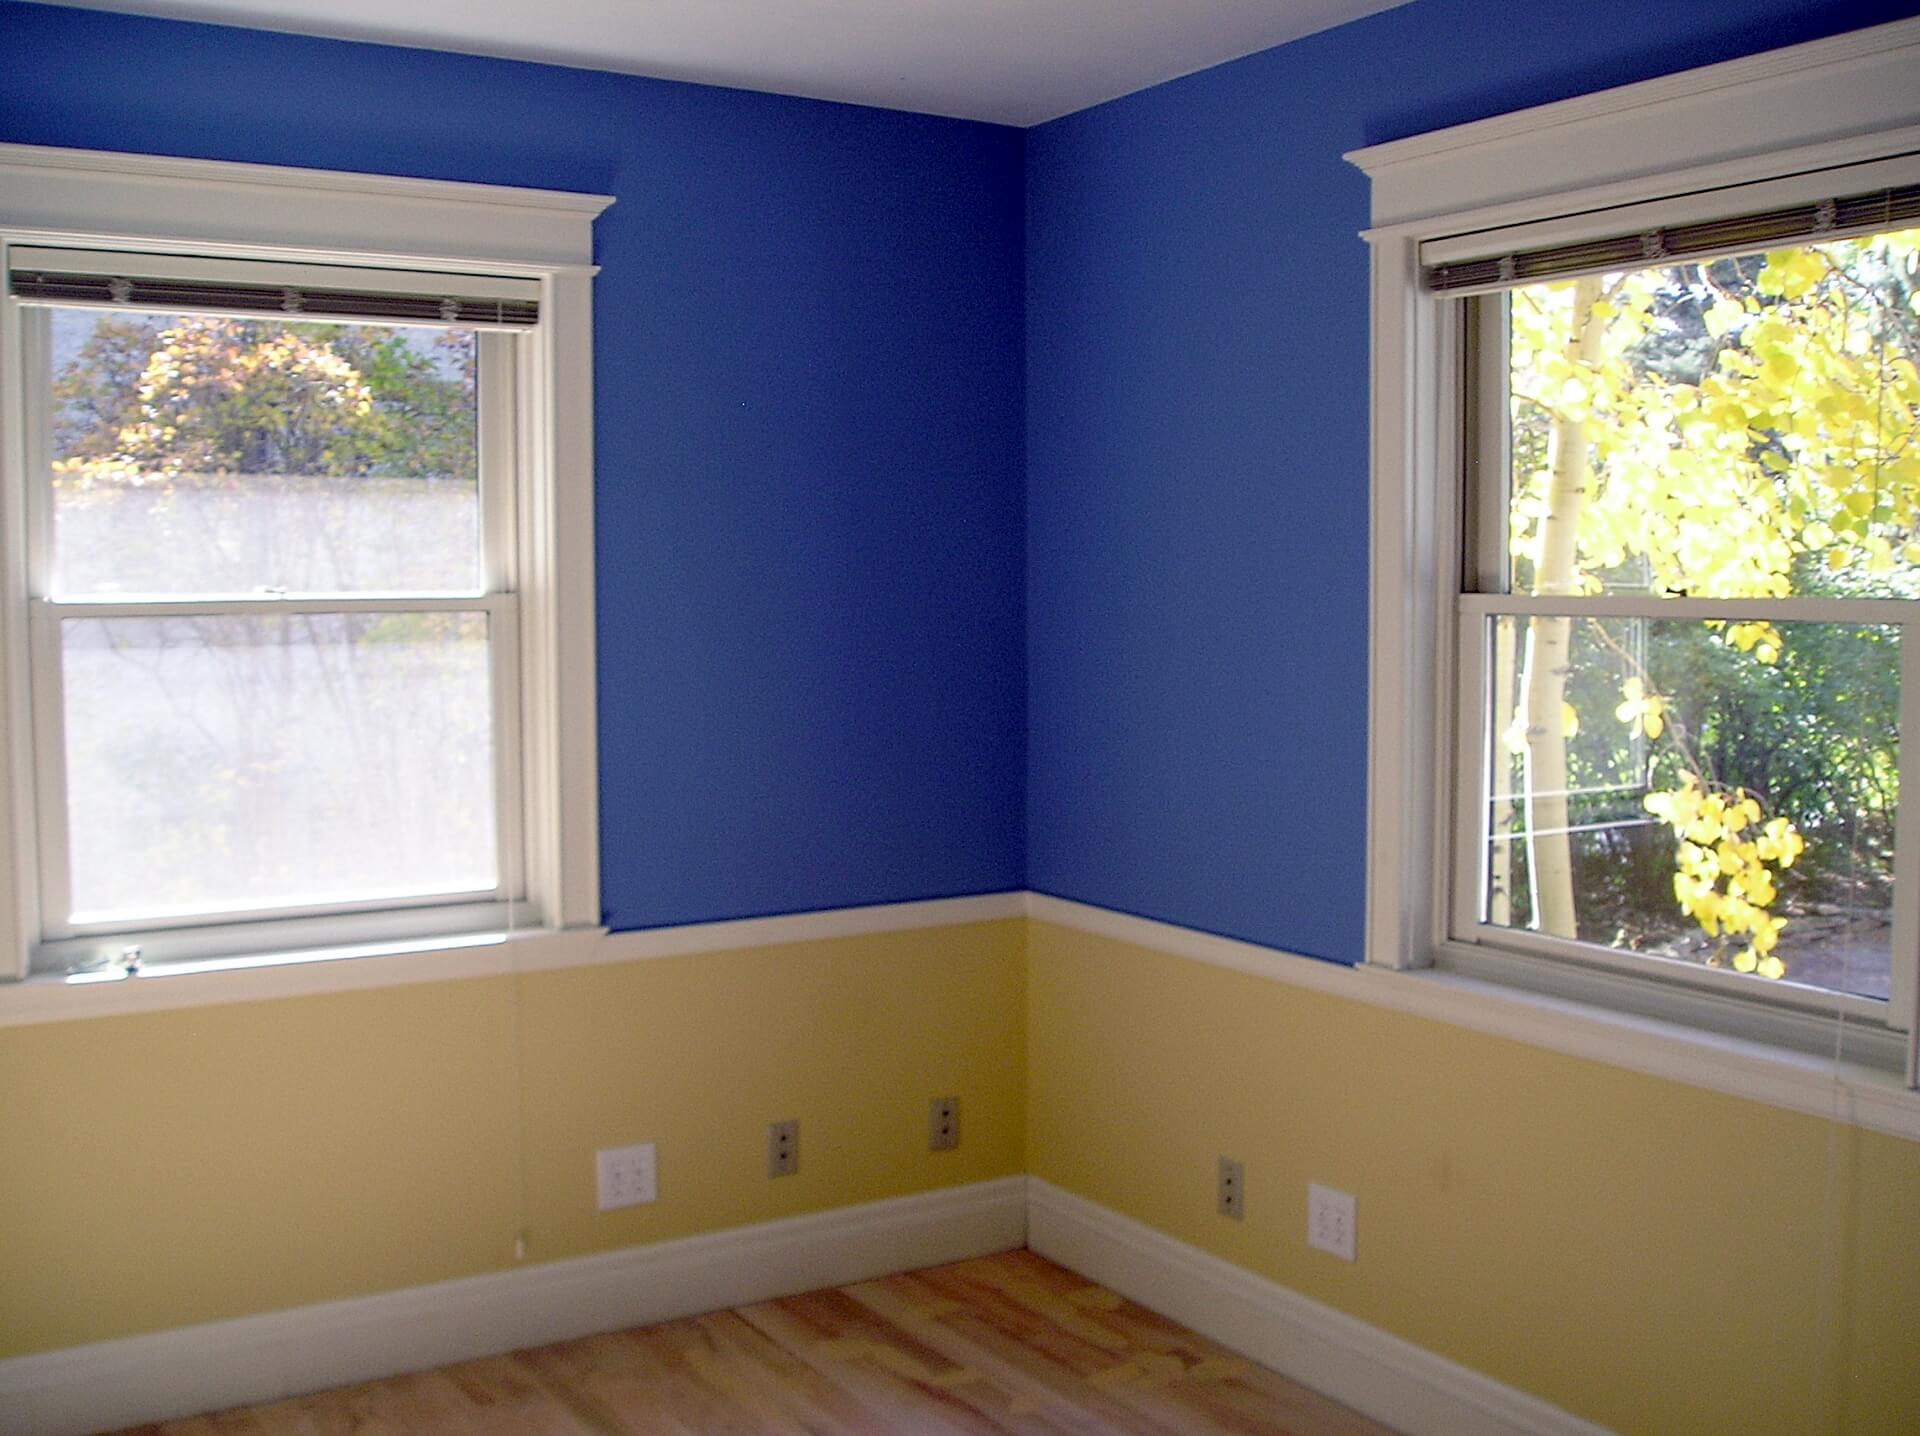 Dining room with a split paint color scheme. Blue on top and yellow below with chair rail trim.